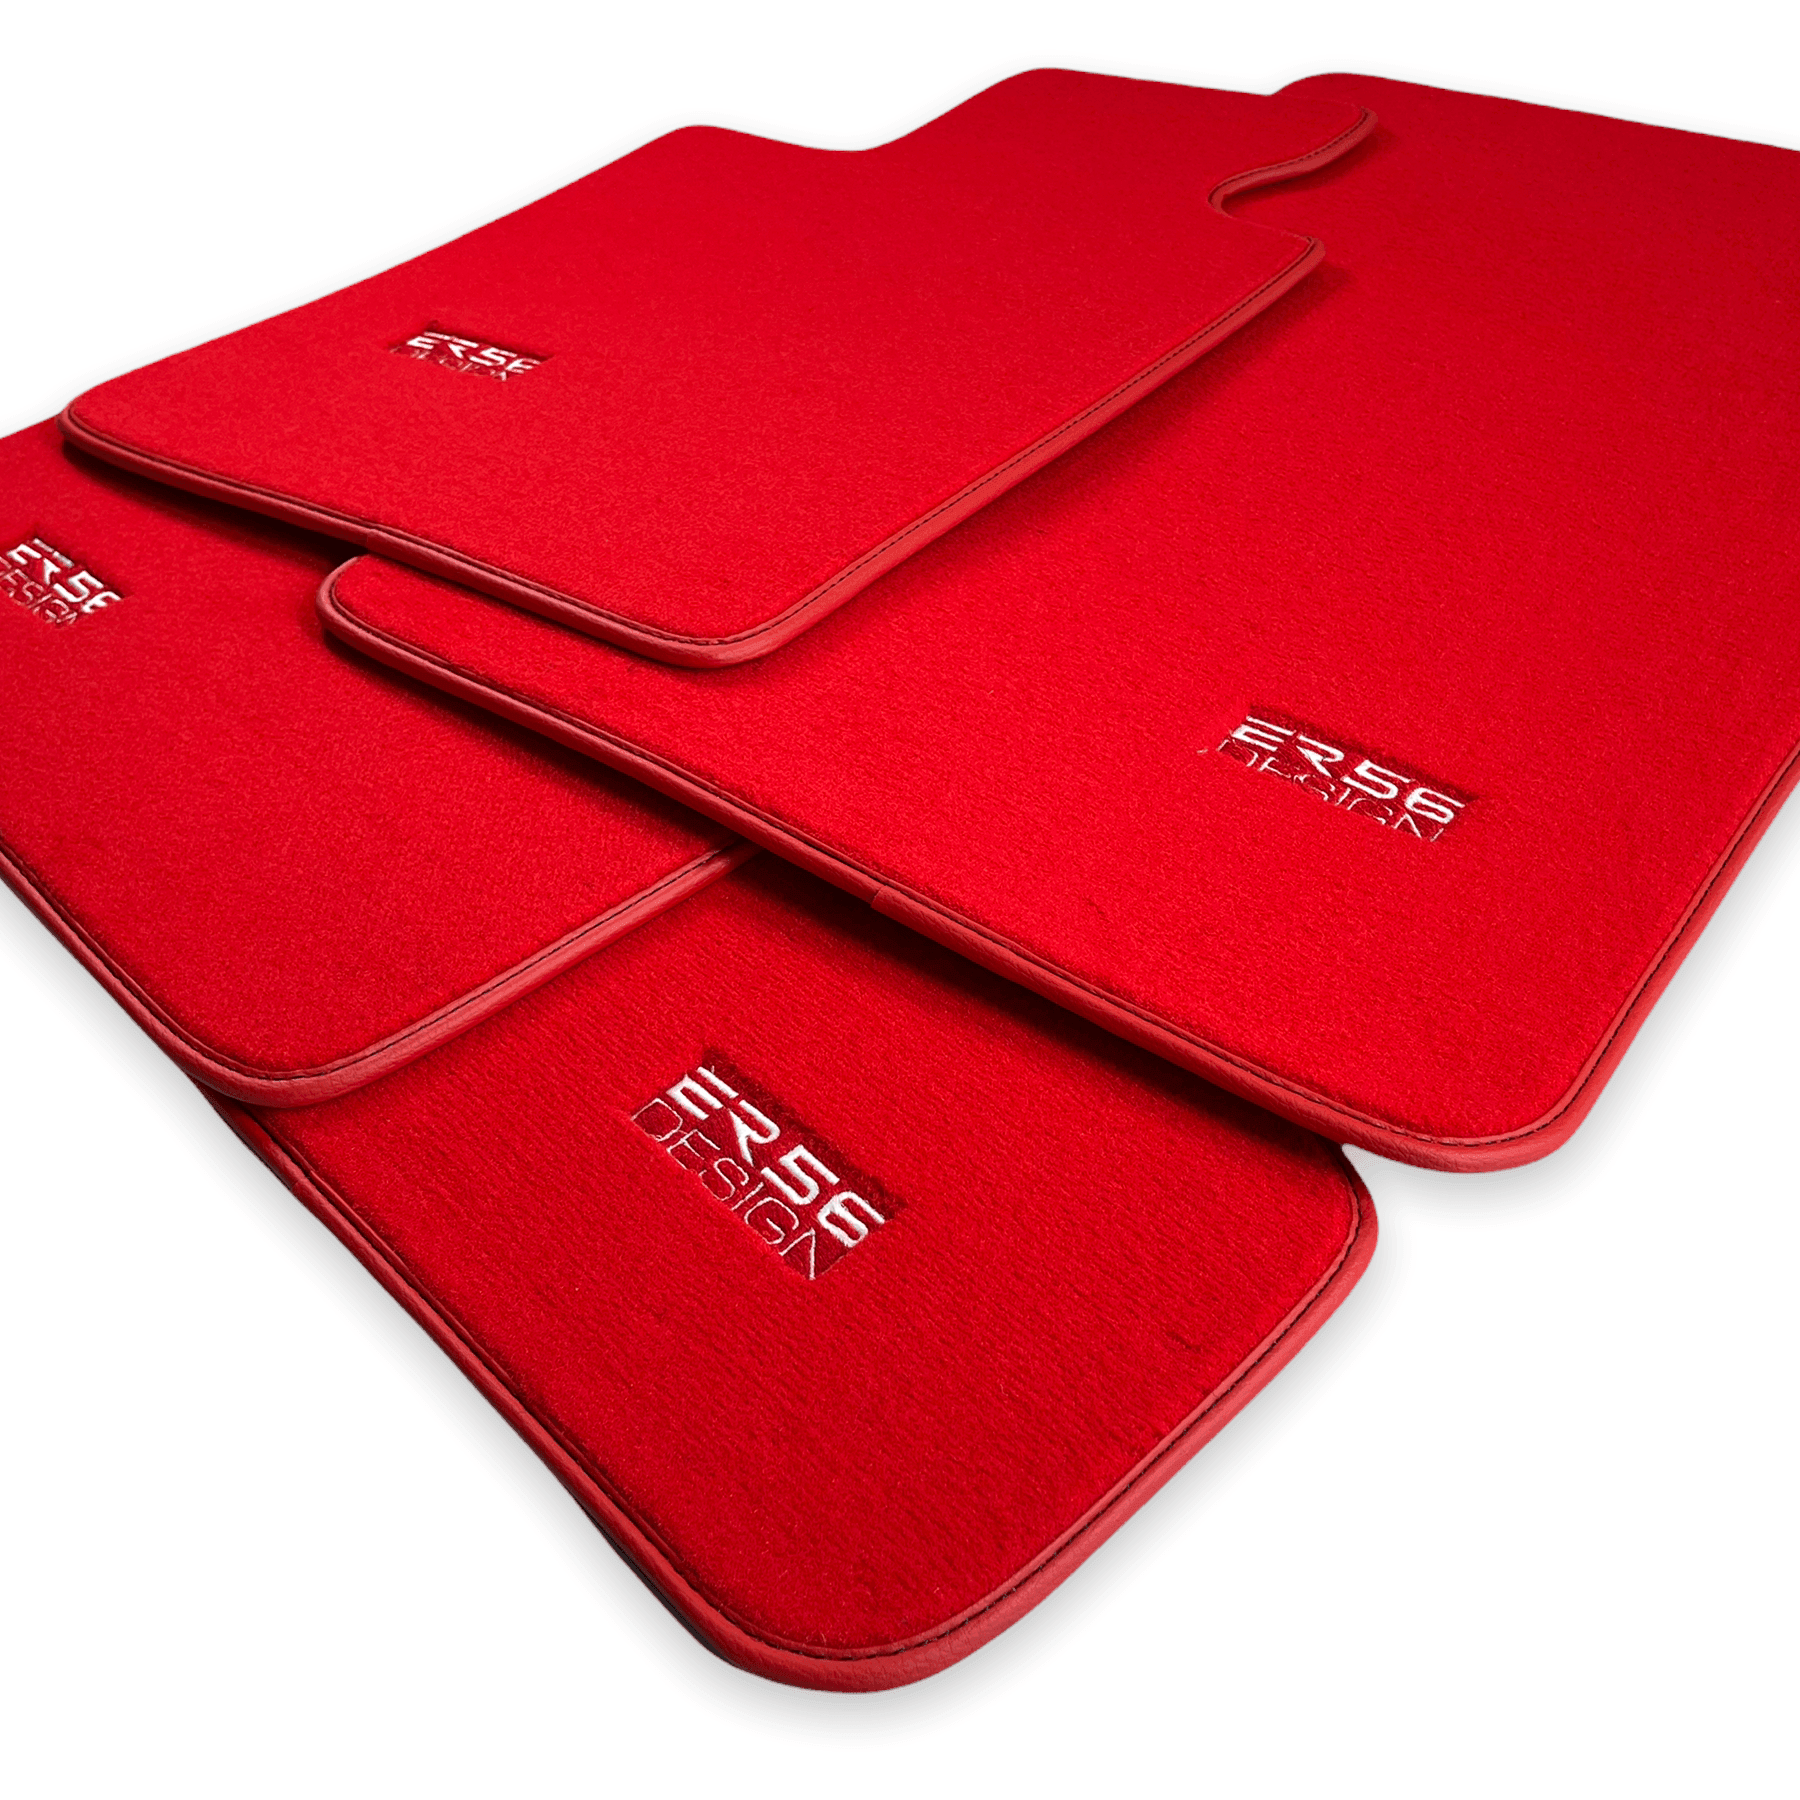 Red Mats For BMW 5 Series E61 Wagon - ER56 Design Brand - AutoWin